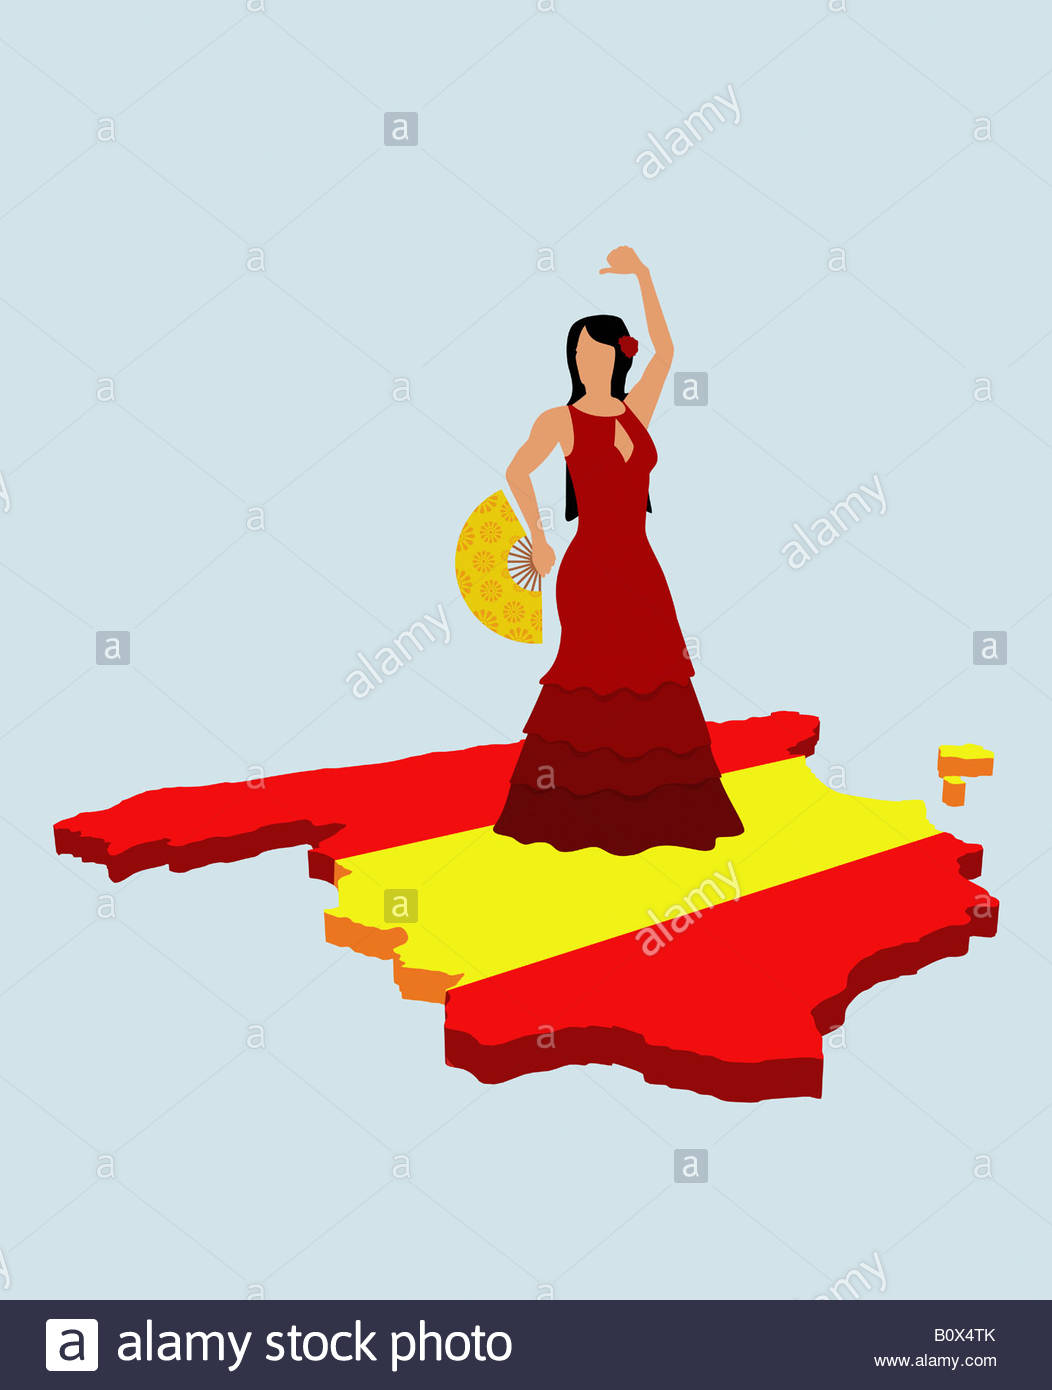 Spain Flag Cartoon | Free download on ClipArtMag